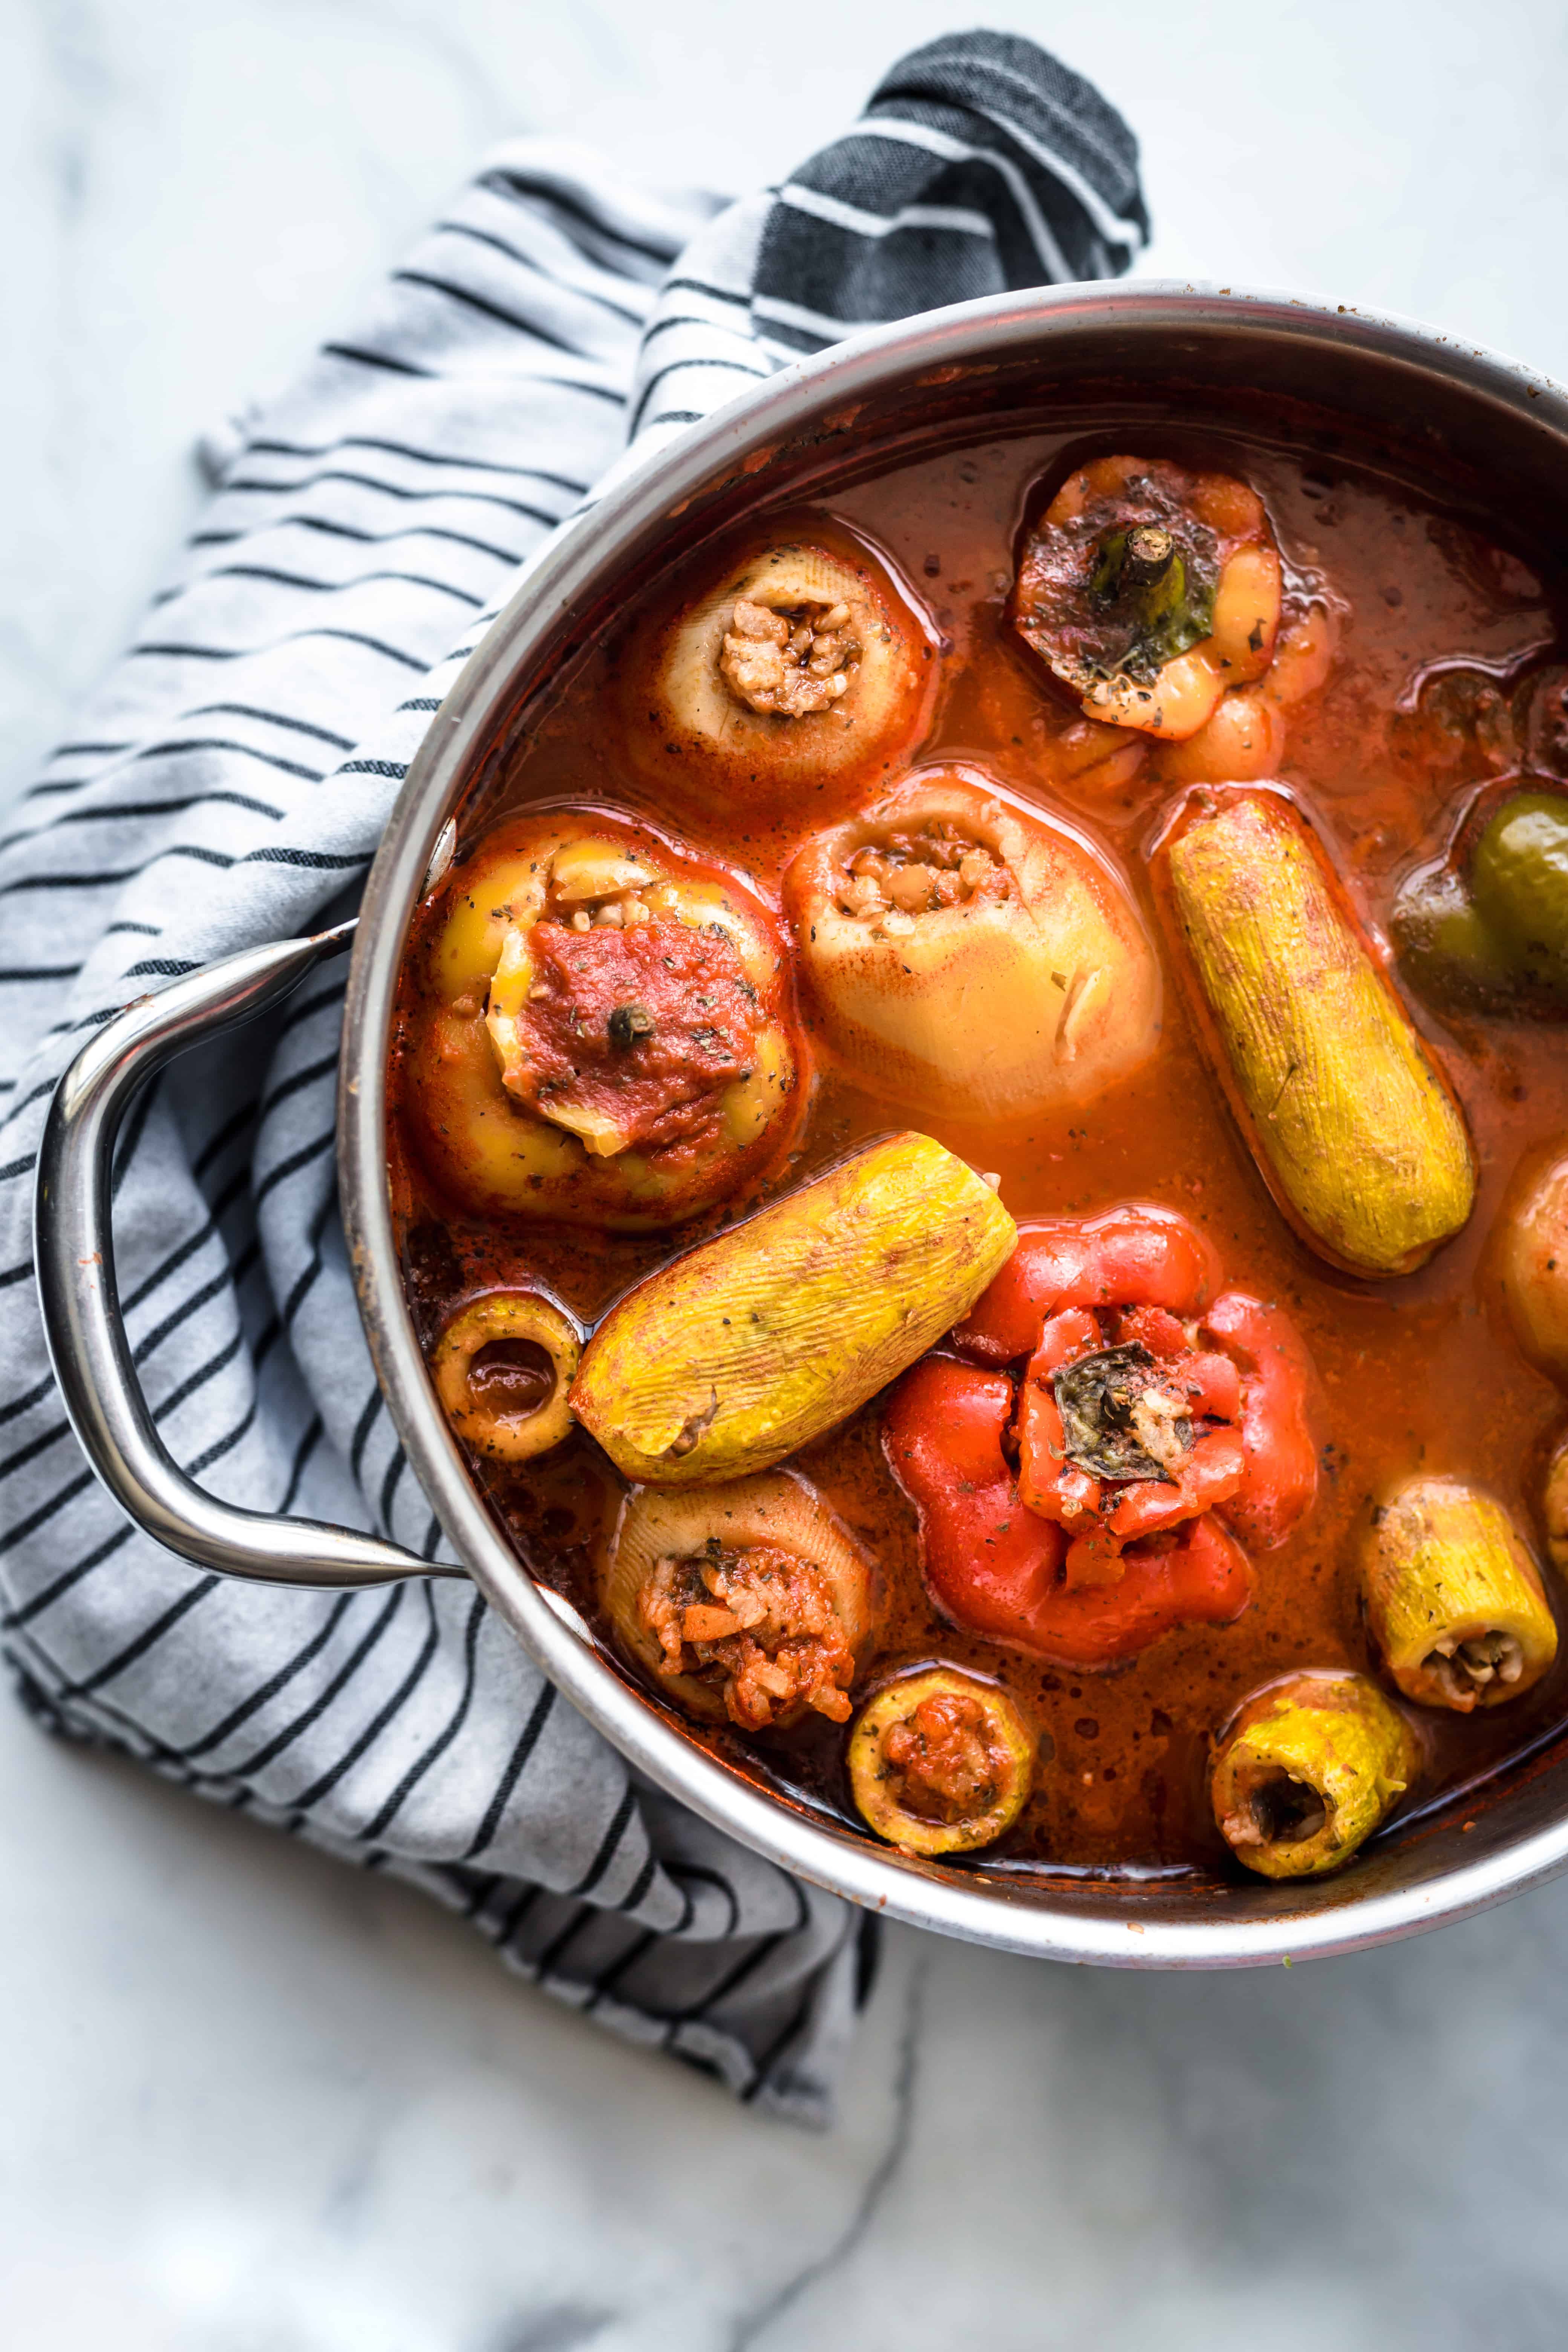 Stuffed vegetables in tomato broth in a large saucepan with a kitchen towel under the pan